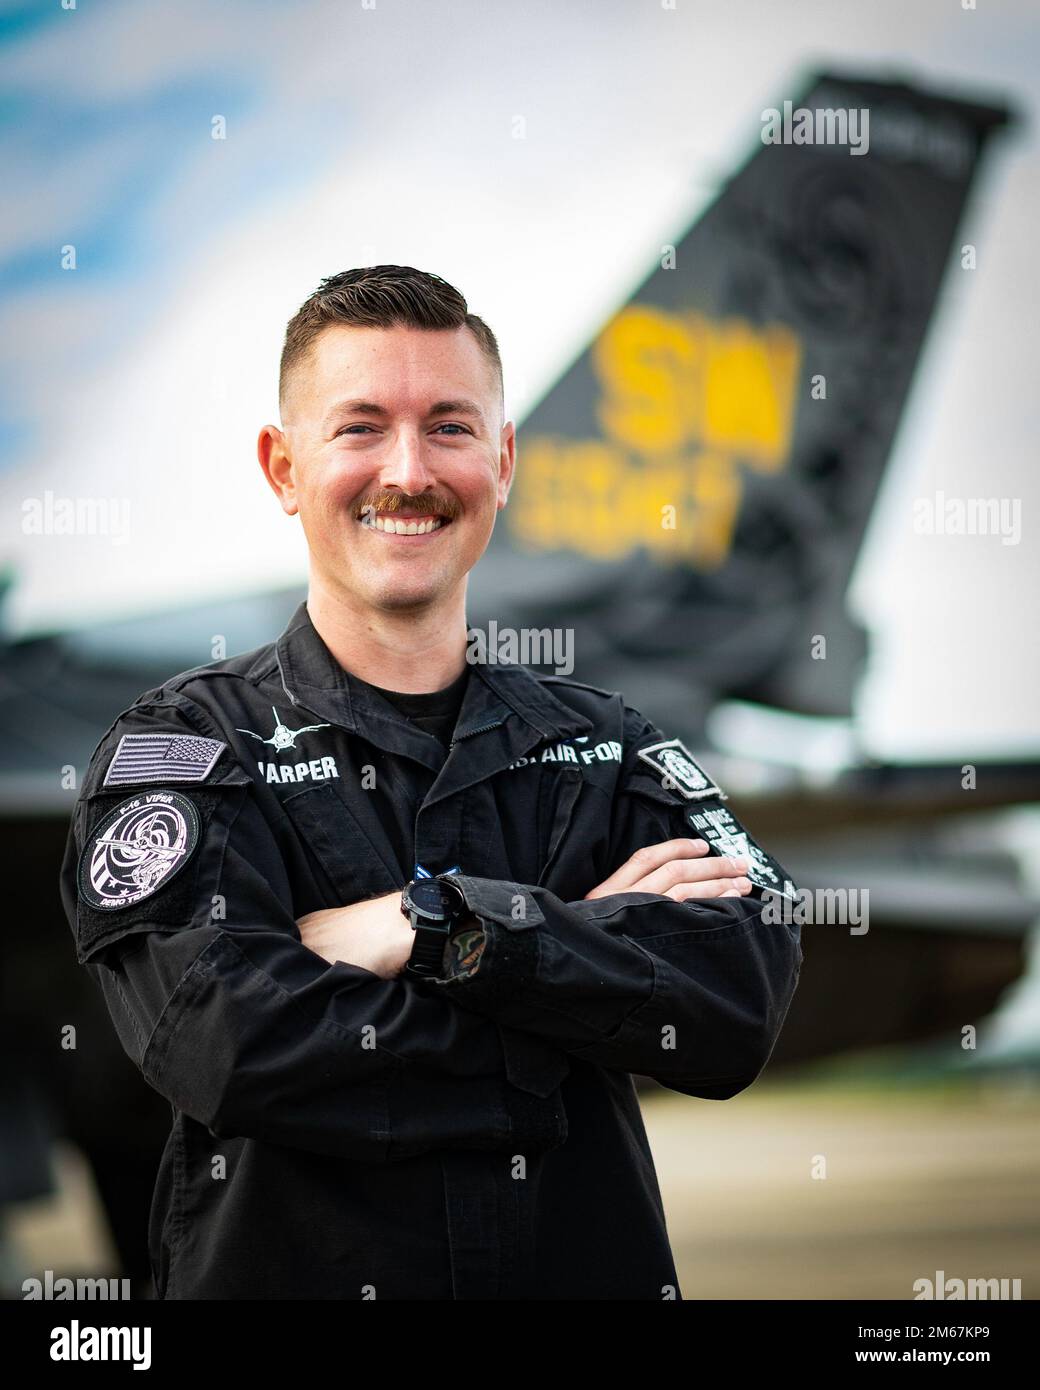 U.S. Air Force Staff Sgt. Robert Harper, F-16 Viper Demonstration Team (VDT) dedicated crew chief, smiles for photo at Shaw Air Force Base, South Carolina, April 13, 2022. The VDT travels to roughly 20 air shows across the United States each year where they engage with local media and members of the community in which they are performing. Stock Photo